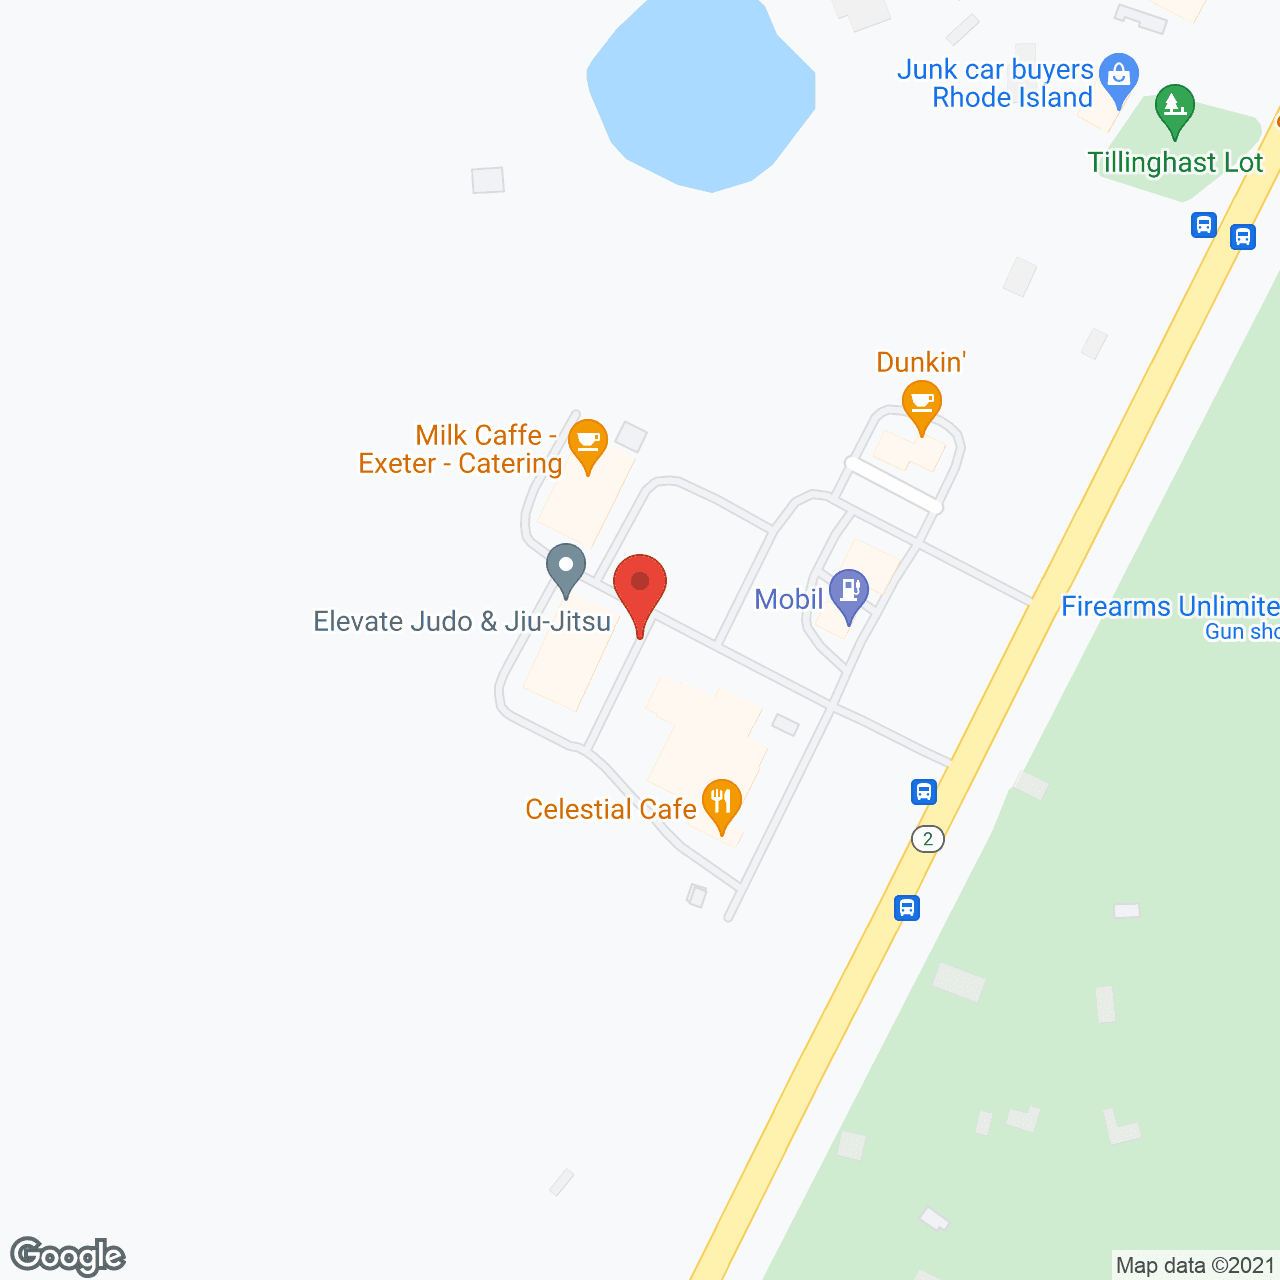 @Home Health Care in google map